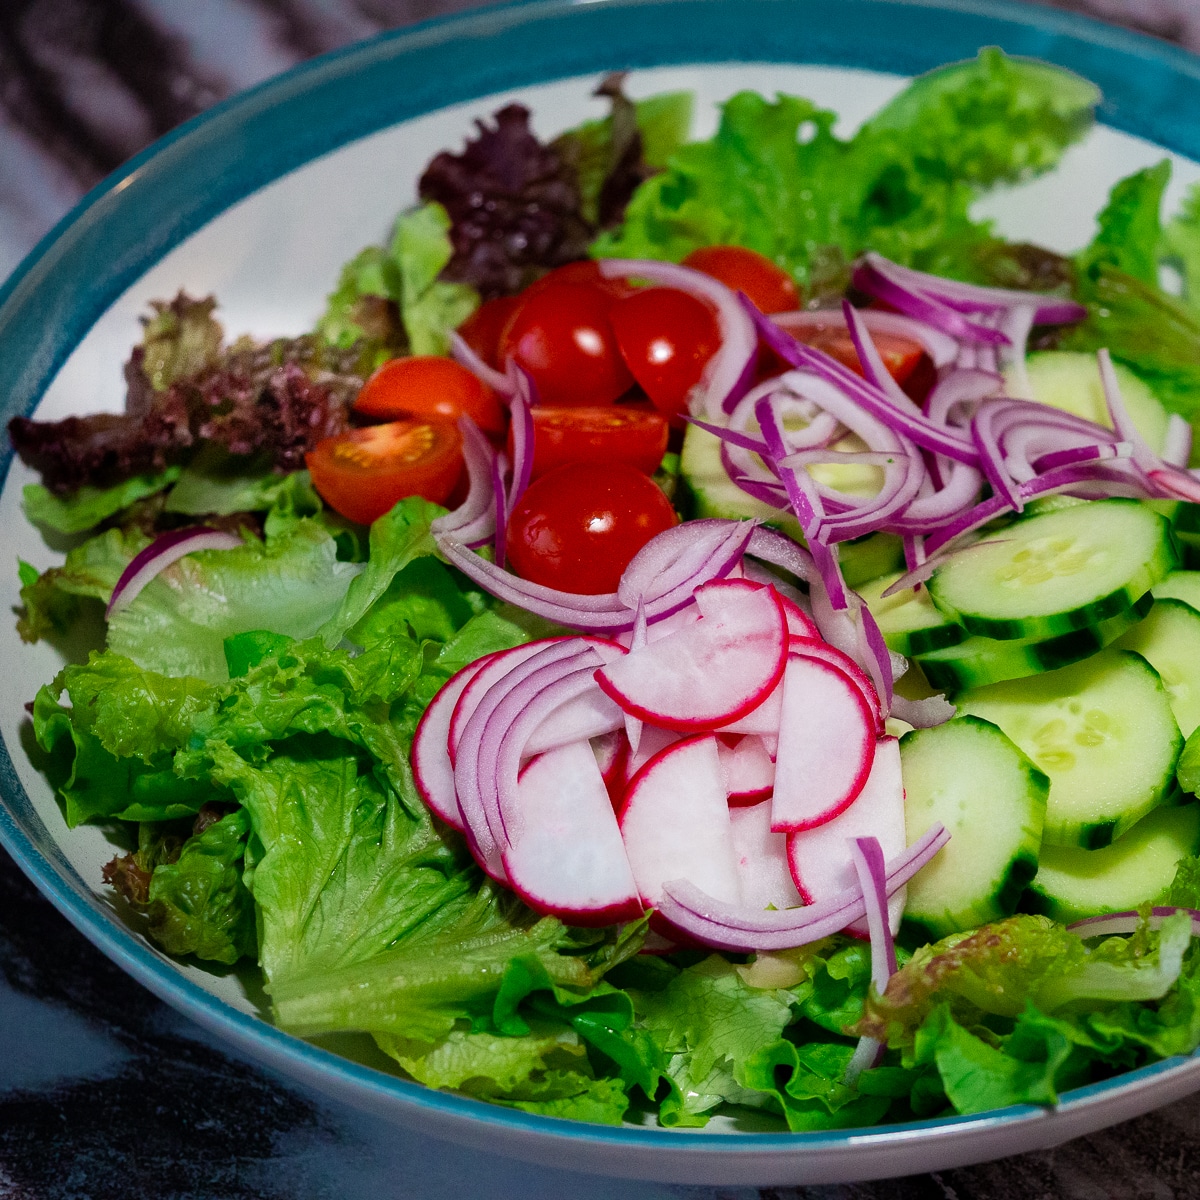 Chopped red and green lettuces ,cherry tomatoes, cucumber, radish and red onion salad on a white and turquoise salad bowl